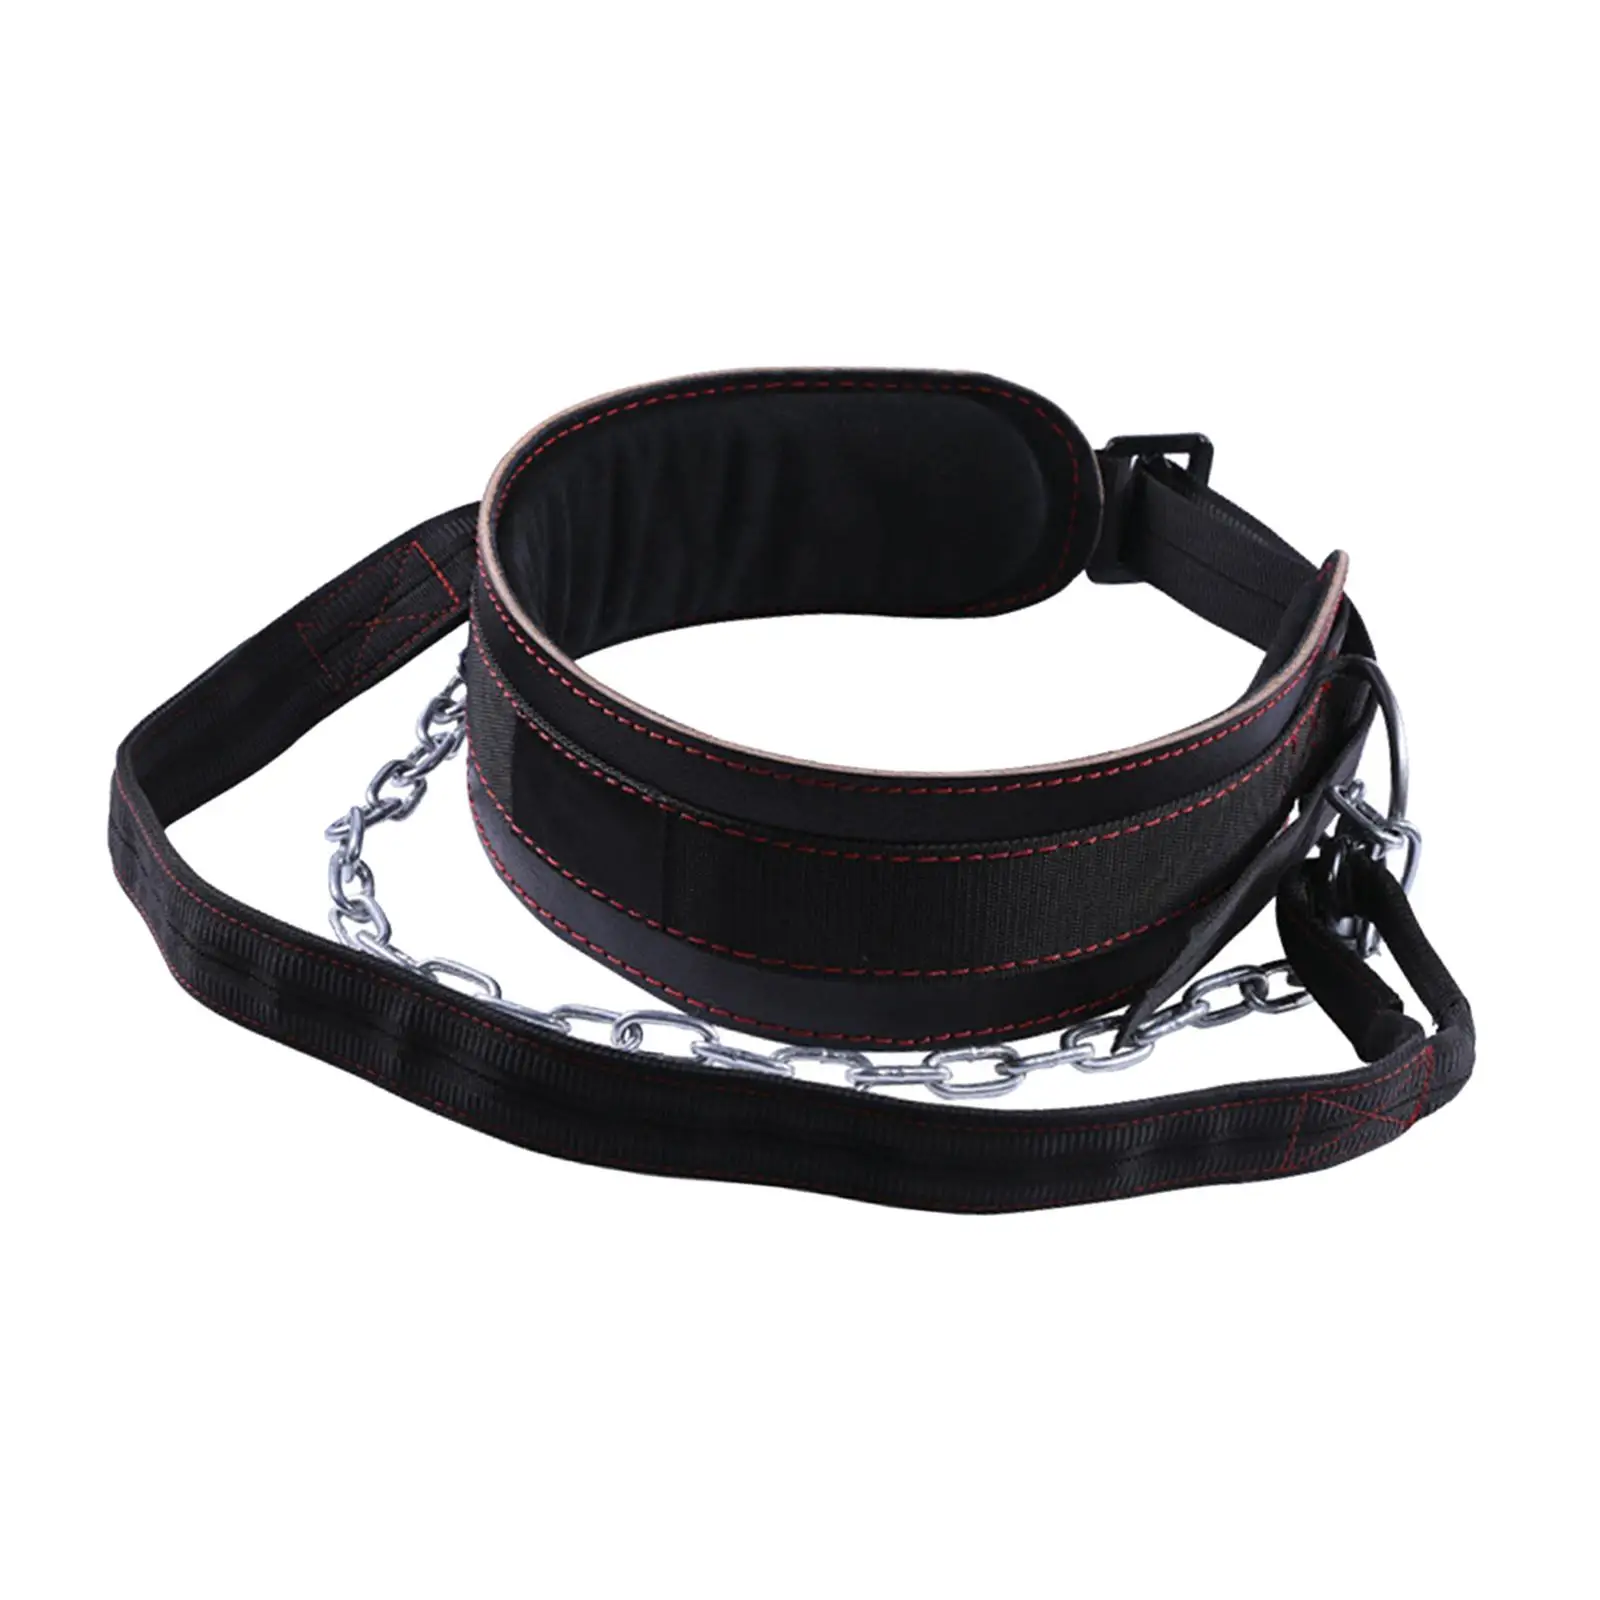 Pull Ups Belt with Chain Spandex Body Building Trainer Weight Belt for Training Powerlifting